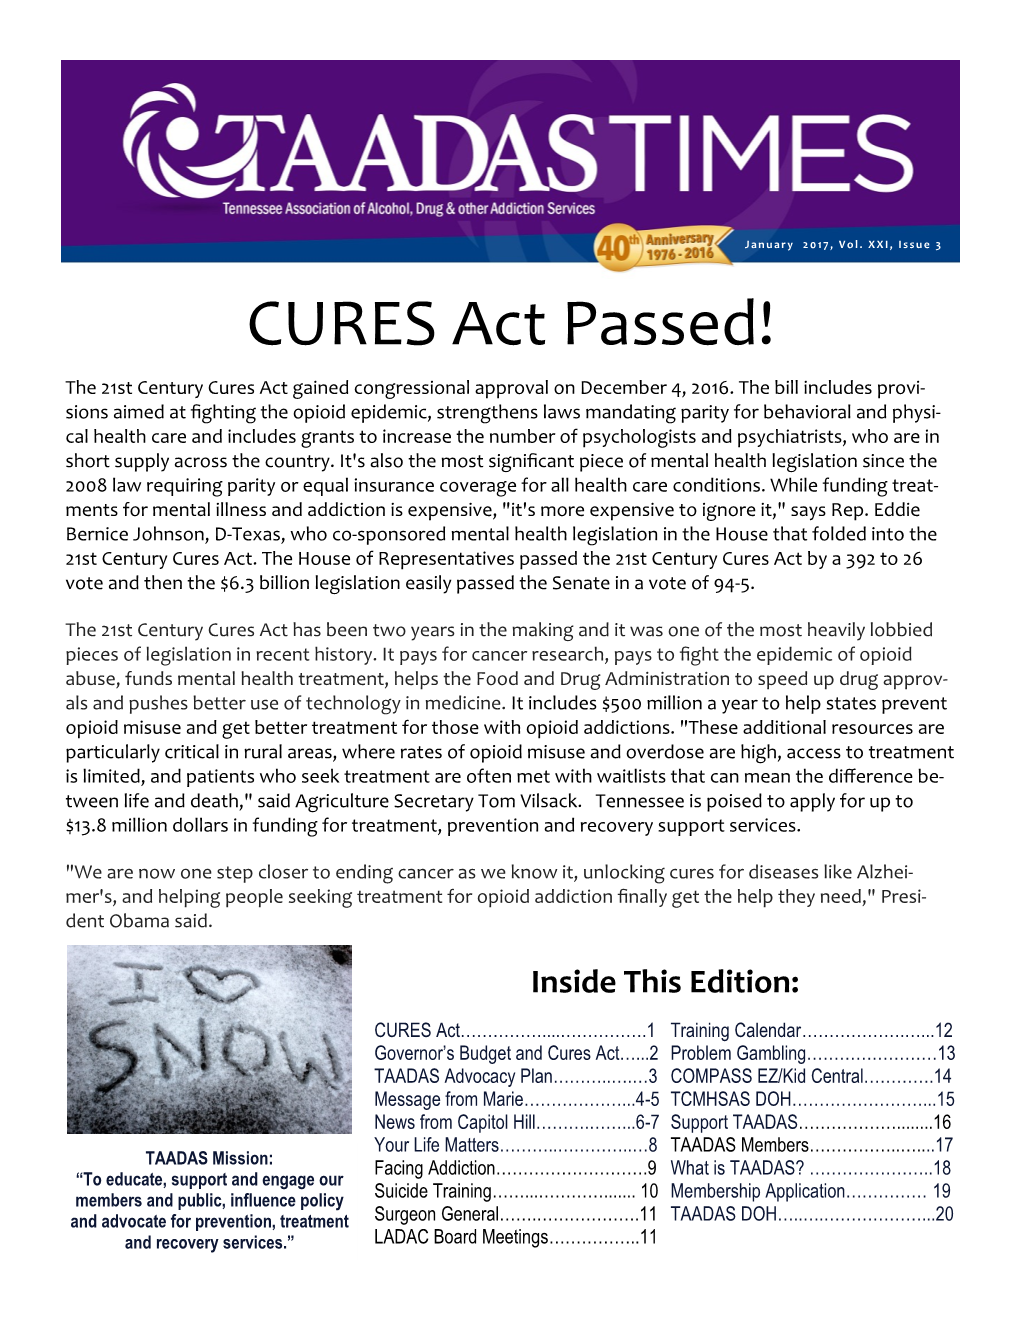 CURES Act Passed!